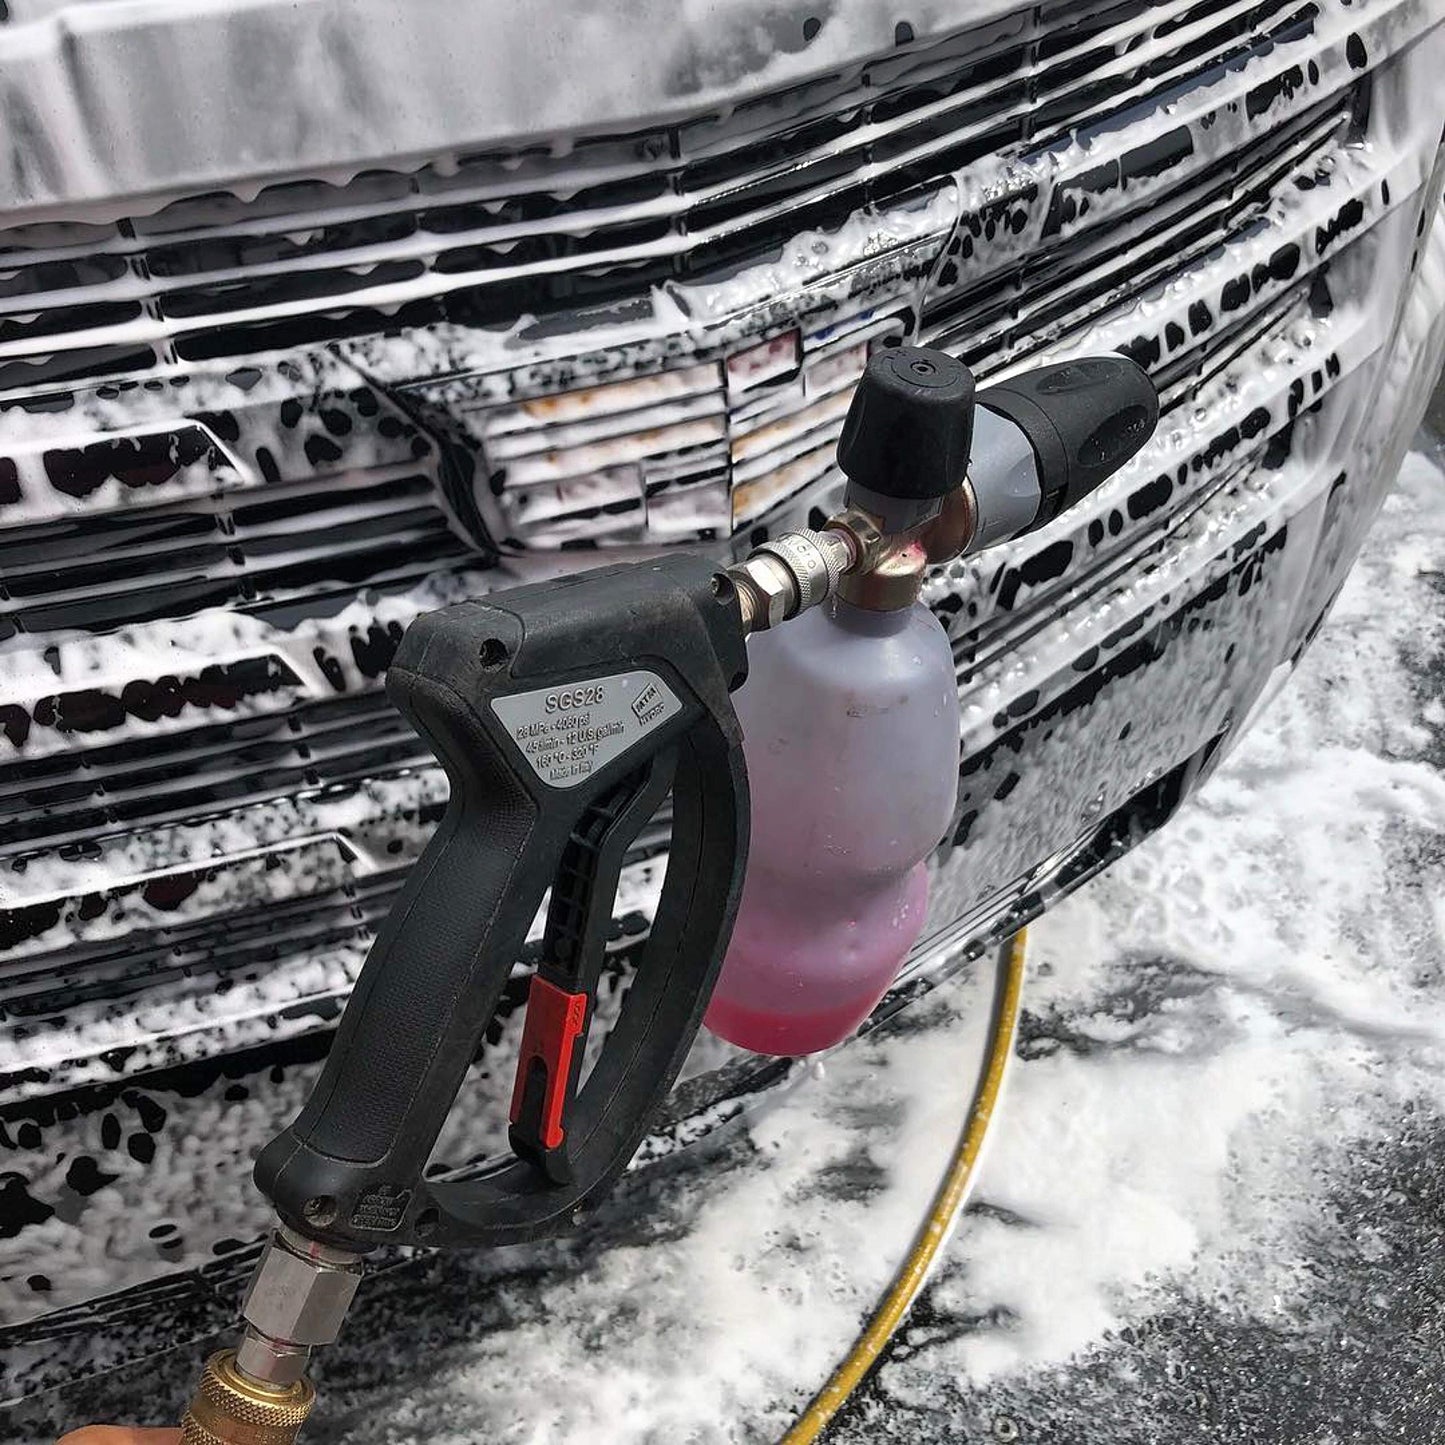 MTM Hydro SGS28 Pressure Washer Car Wash Sprayer Gun with Swivel, Stainless Steel QC Fittings, High Pressure 4000 PSI Power Washer Attachment for Boat, Roof, Car Washing